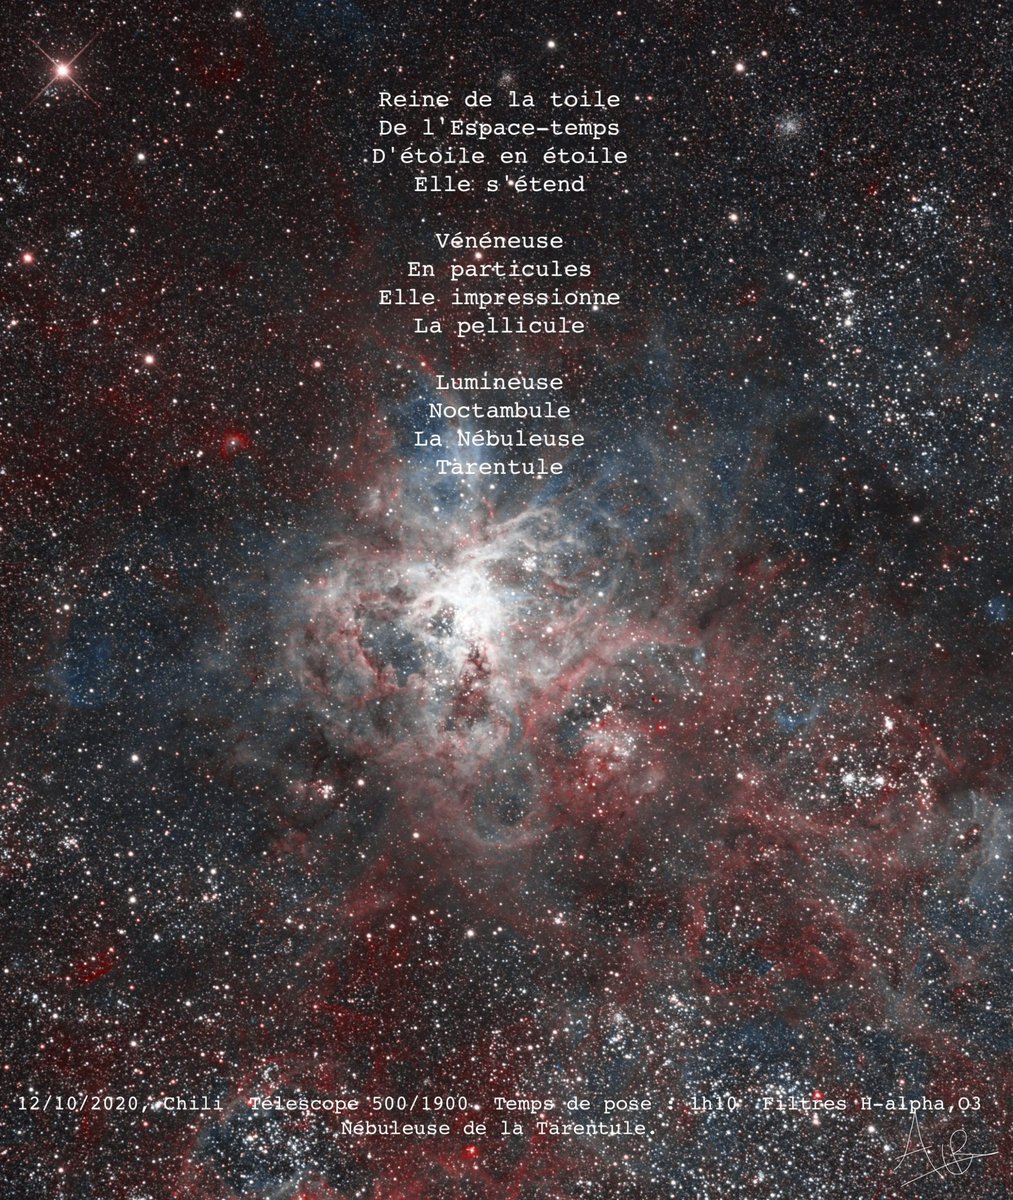 @aljaparis If you like Poetry & space, this is a kind of crypto-poetry you may like !
More on my website:
airtwoair.com